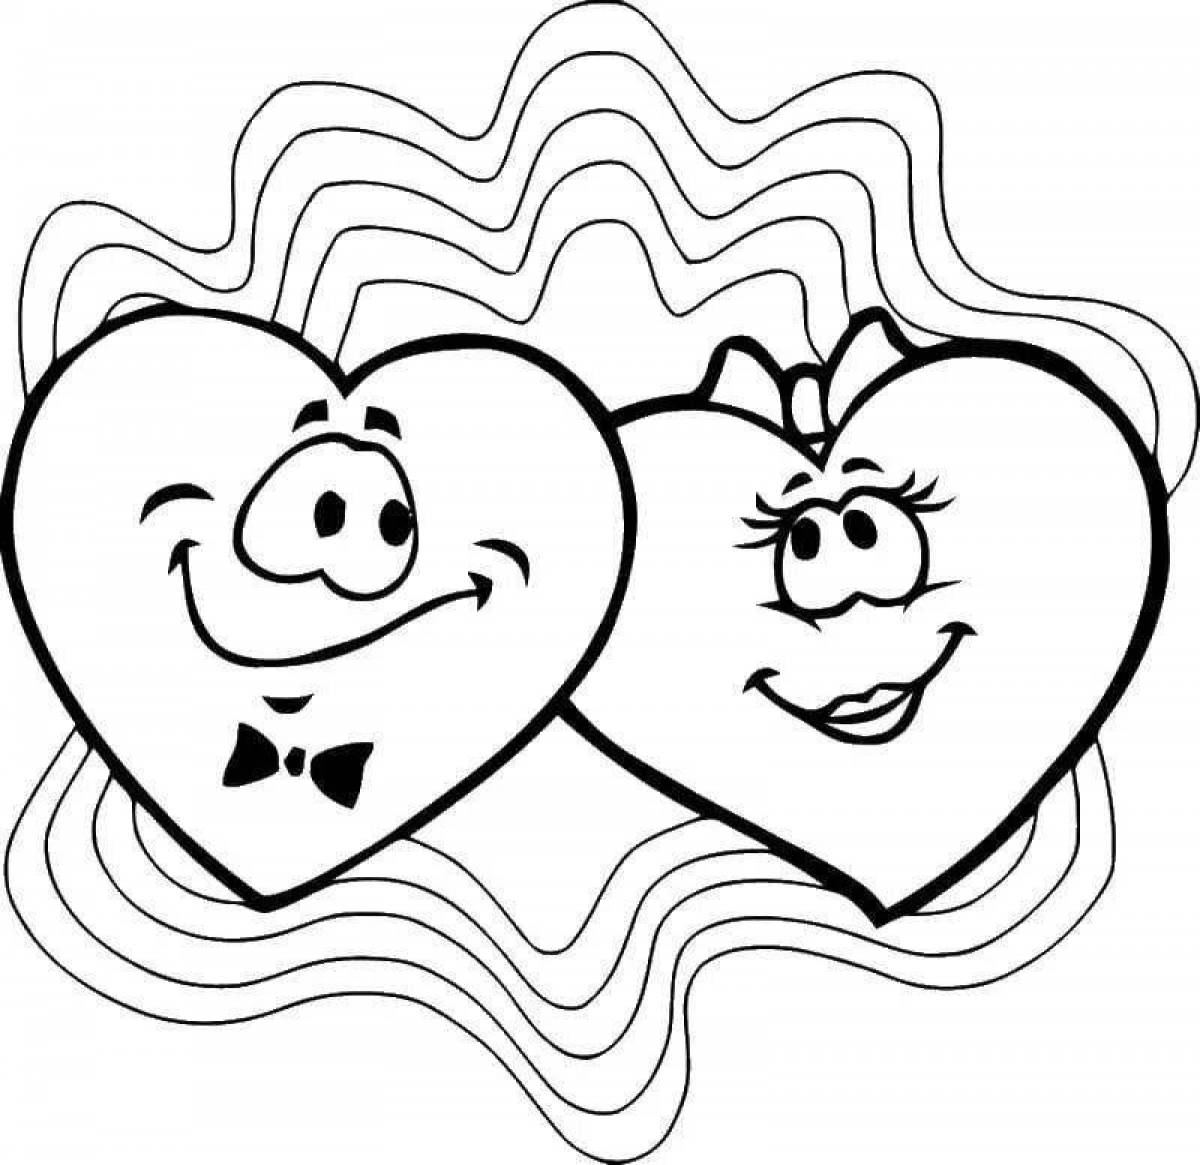 Lovely valentines day coloring page